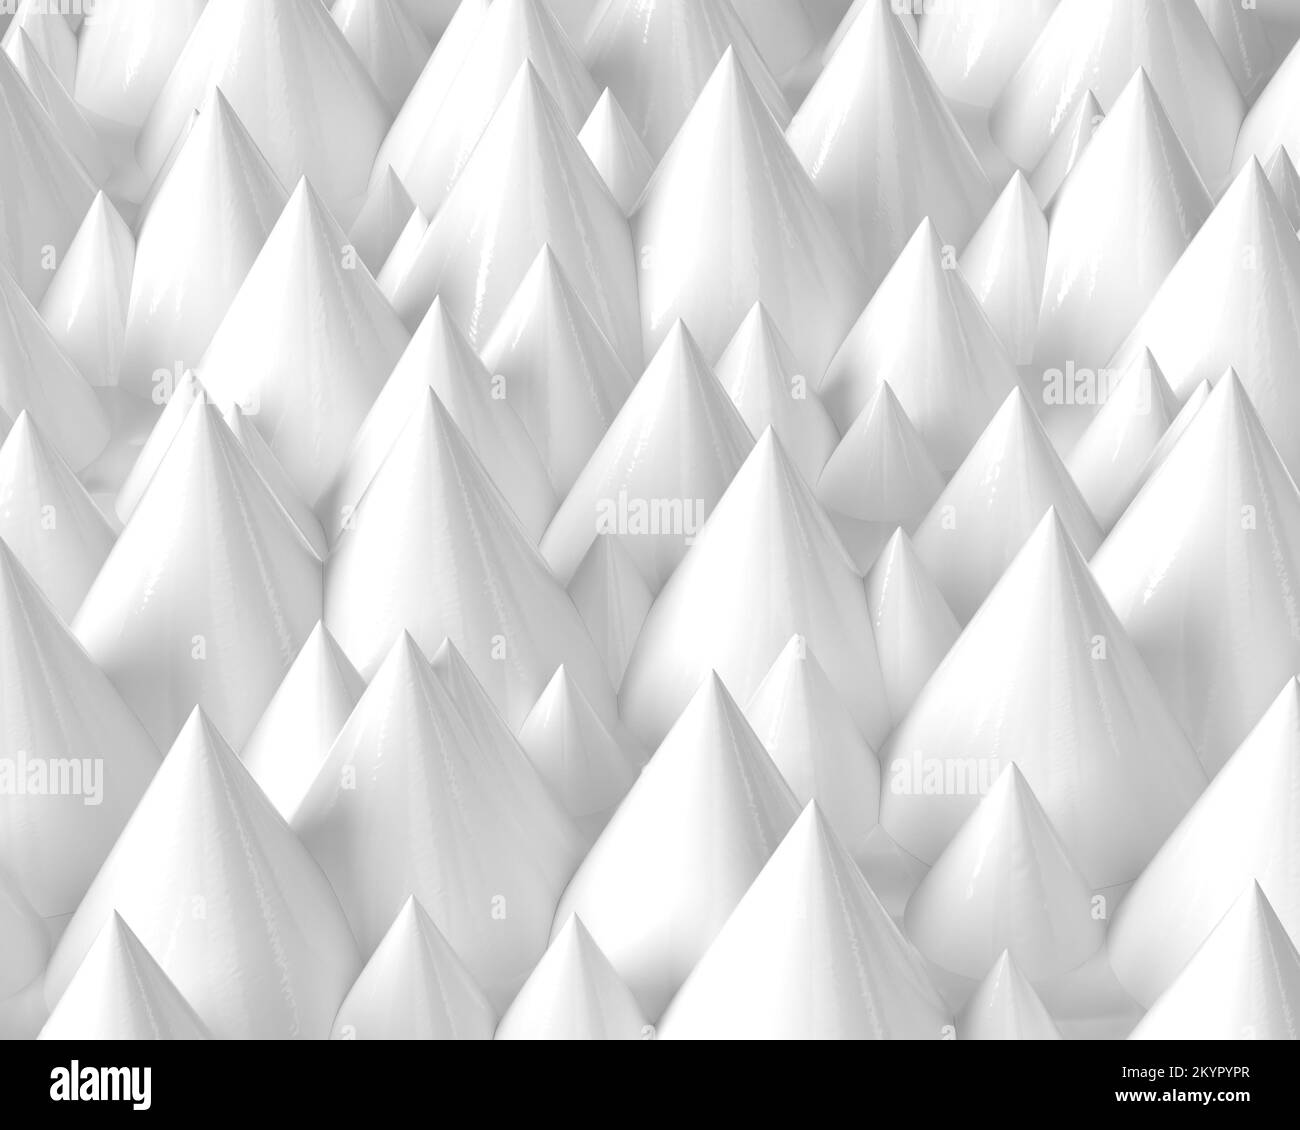 Three dimensional model. Pointed white peaks. Stock Photo